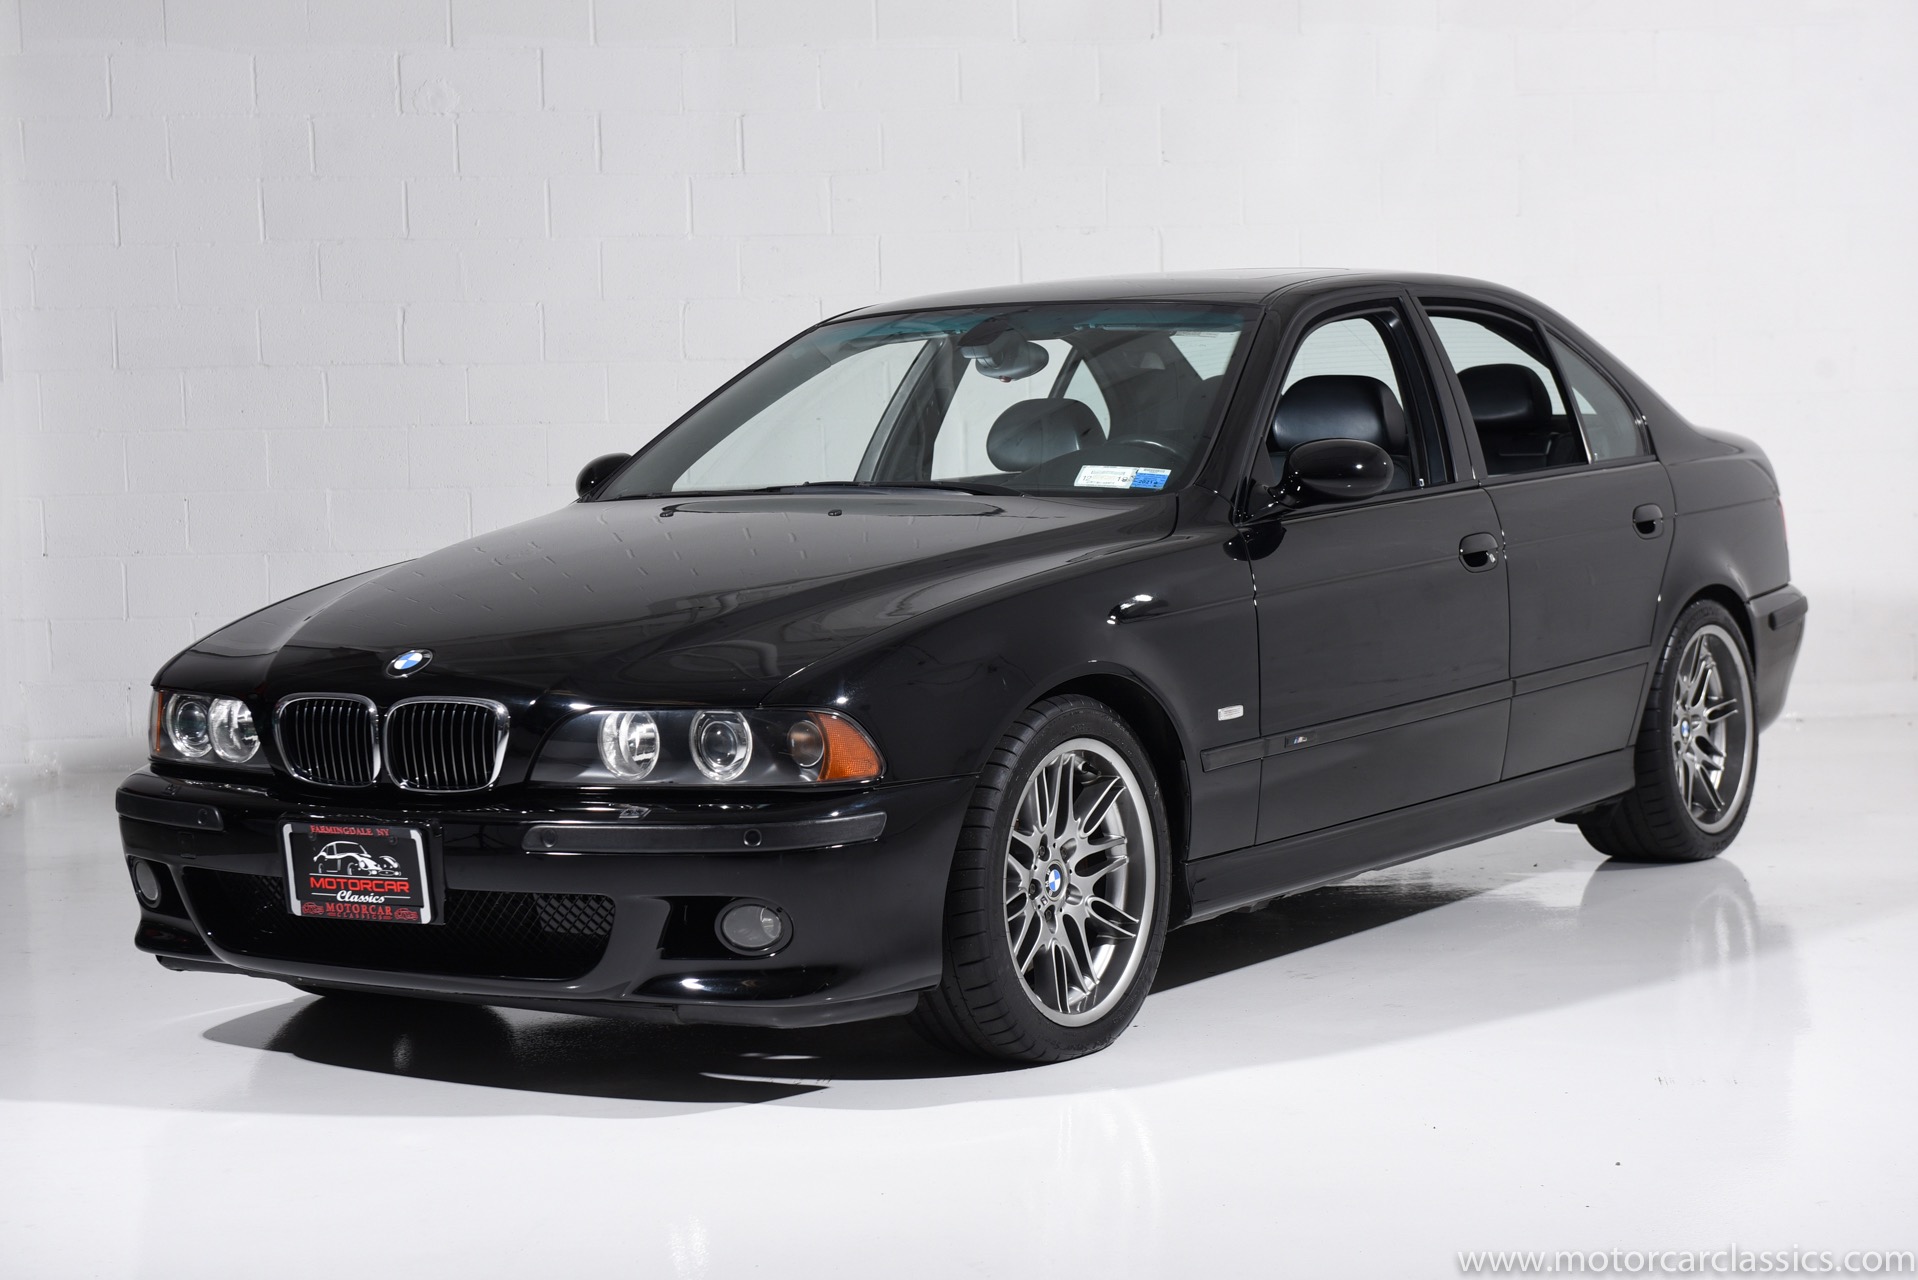 2002 BMW M5 for sale #336154